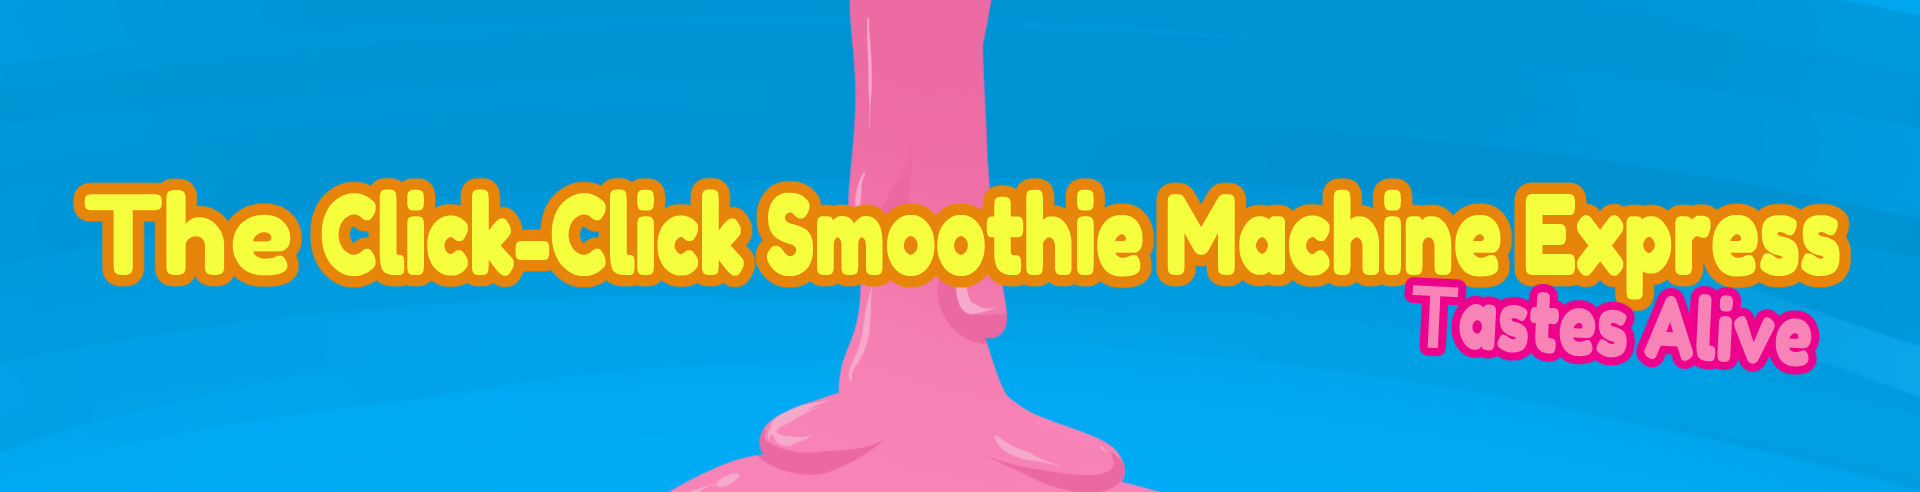 The Click Click Smoothie Machine Express Tastes Alive